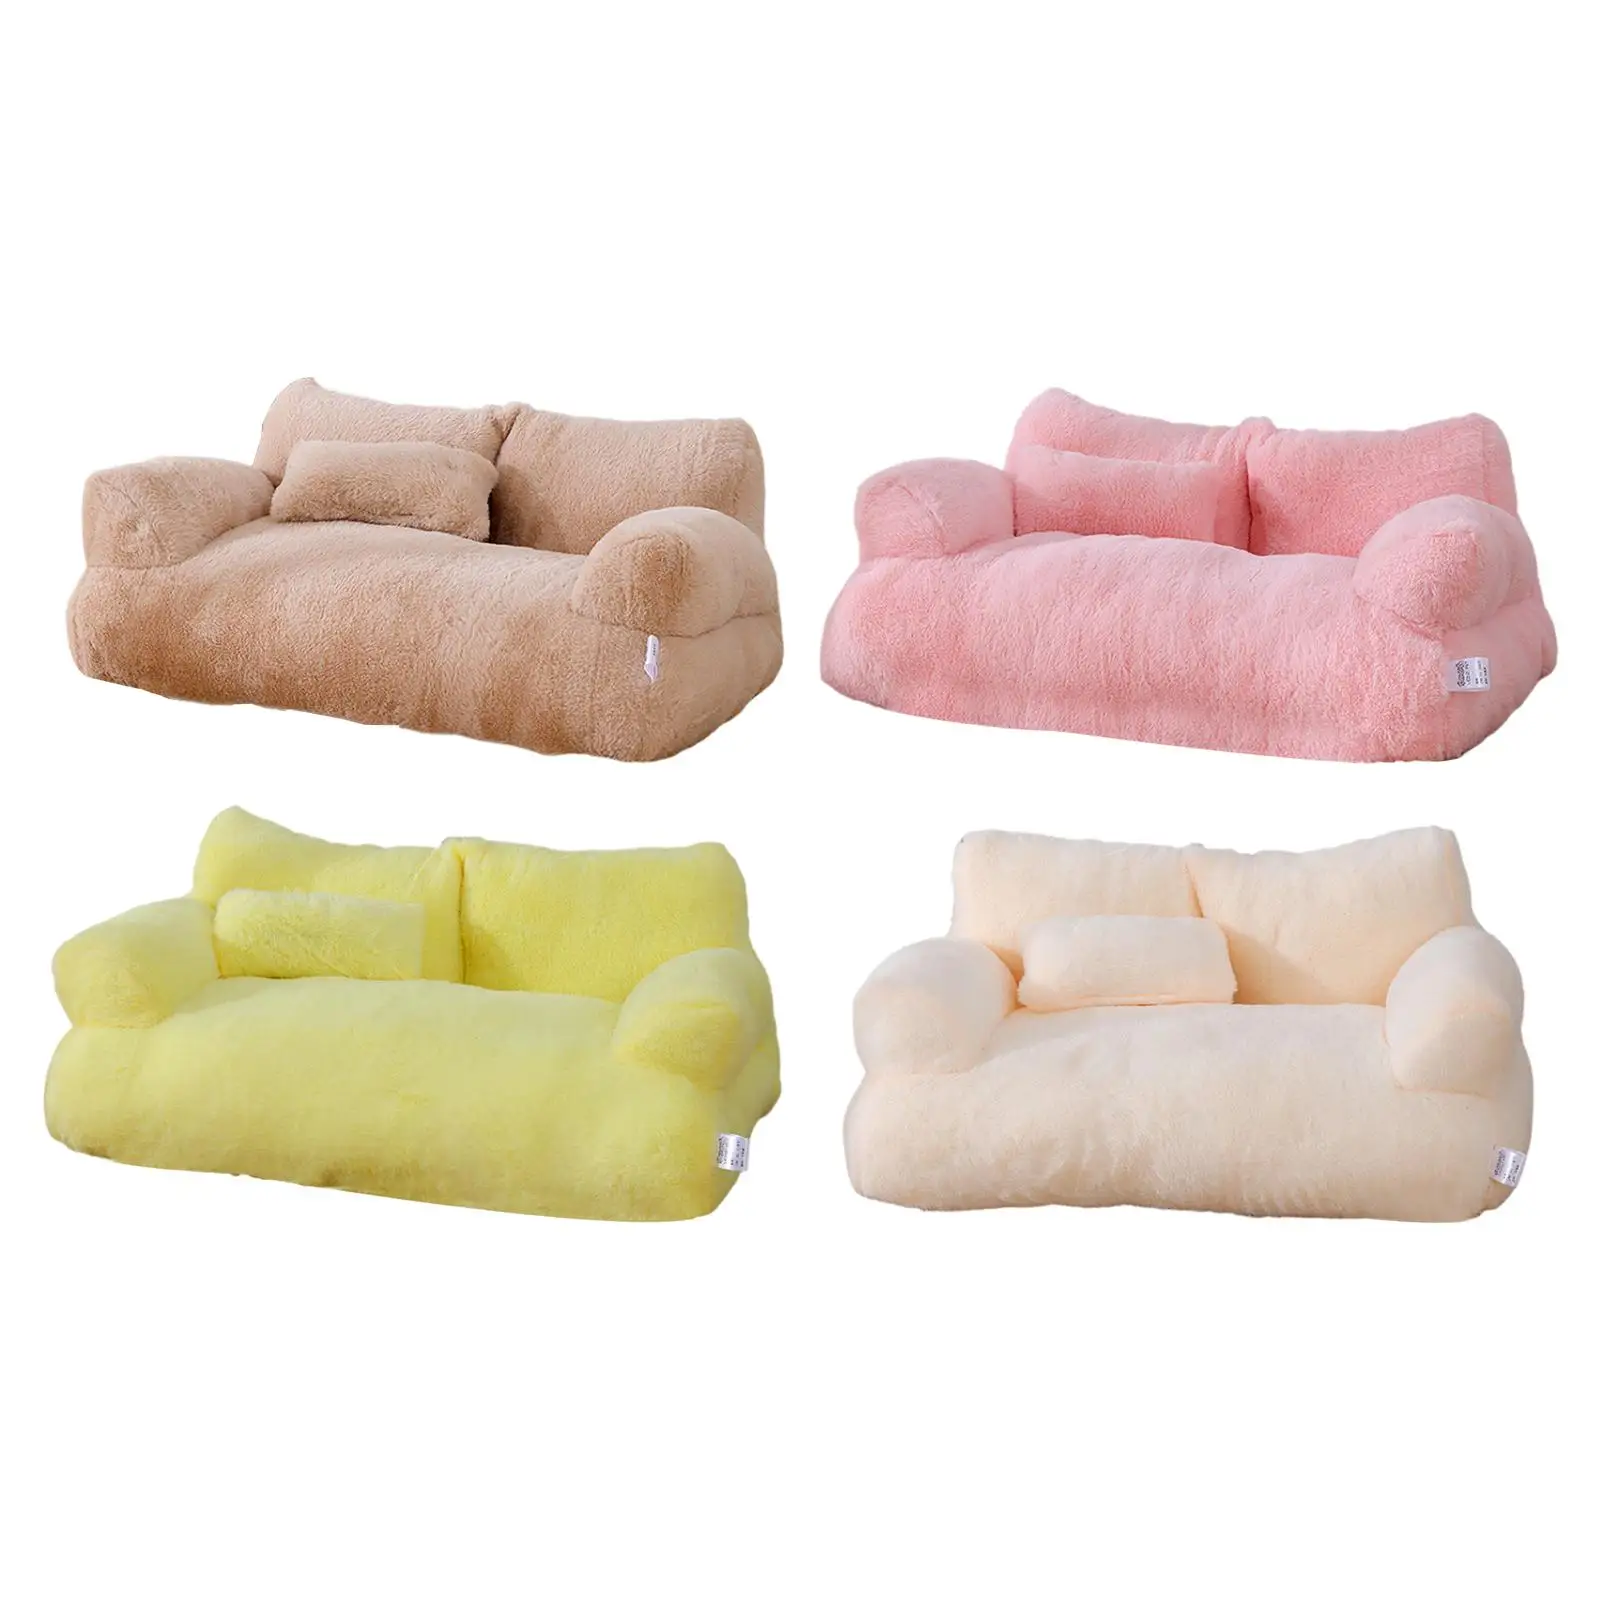 Pet Sofa Cat Sofa Fashion Nonslip Bottom Dog Couch Dog Beds for Cats and Small